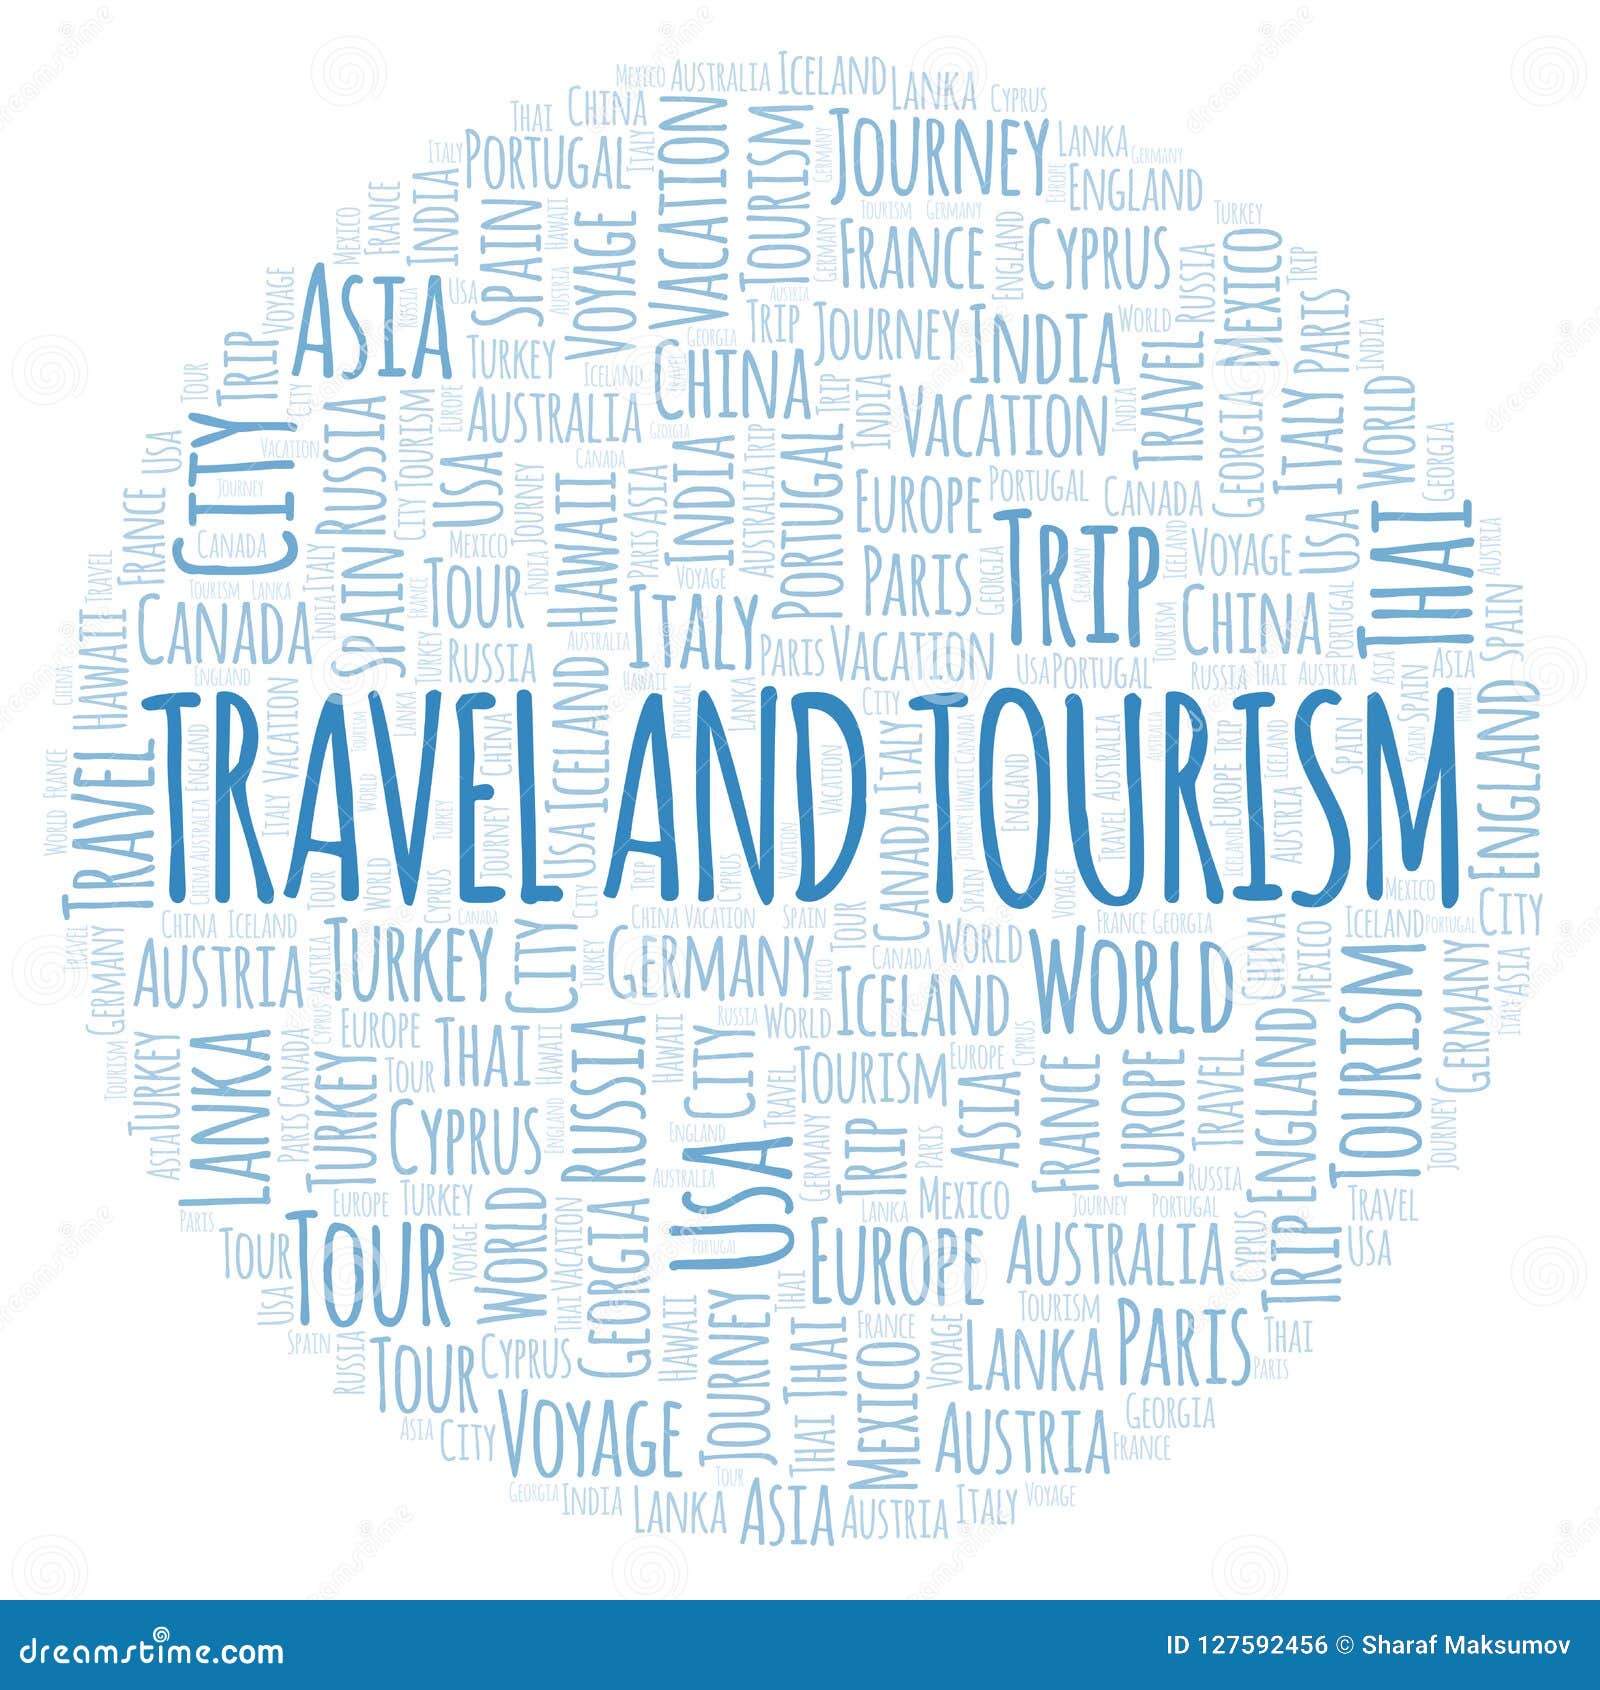 words related to tourism